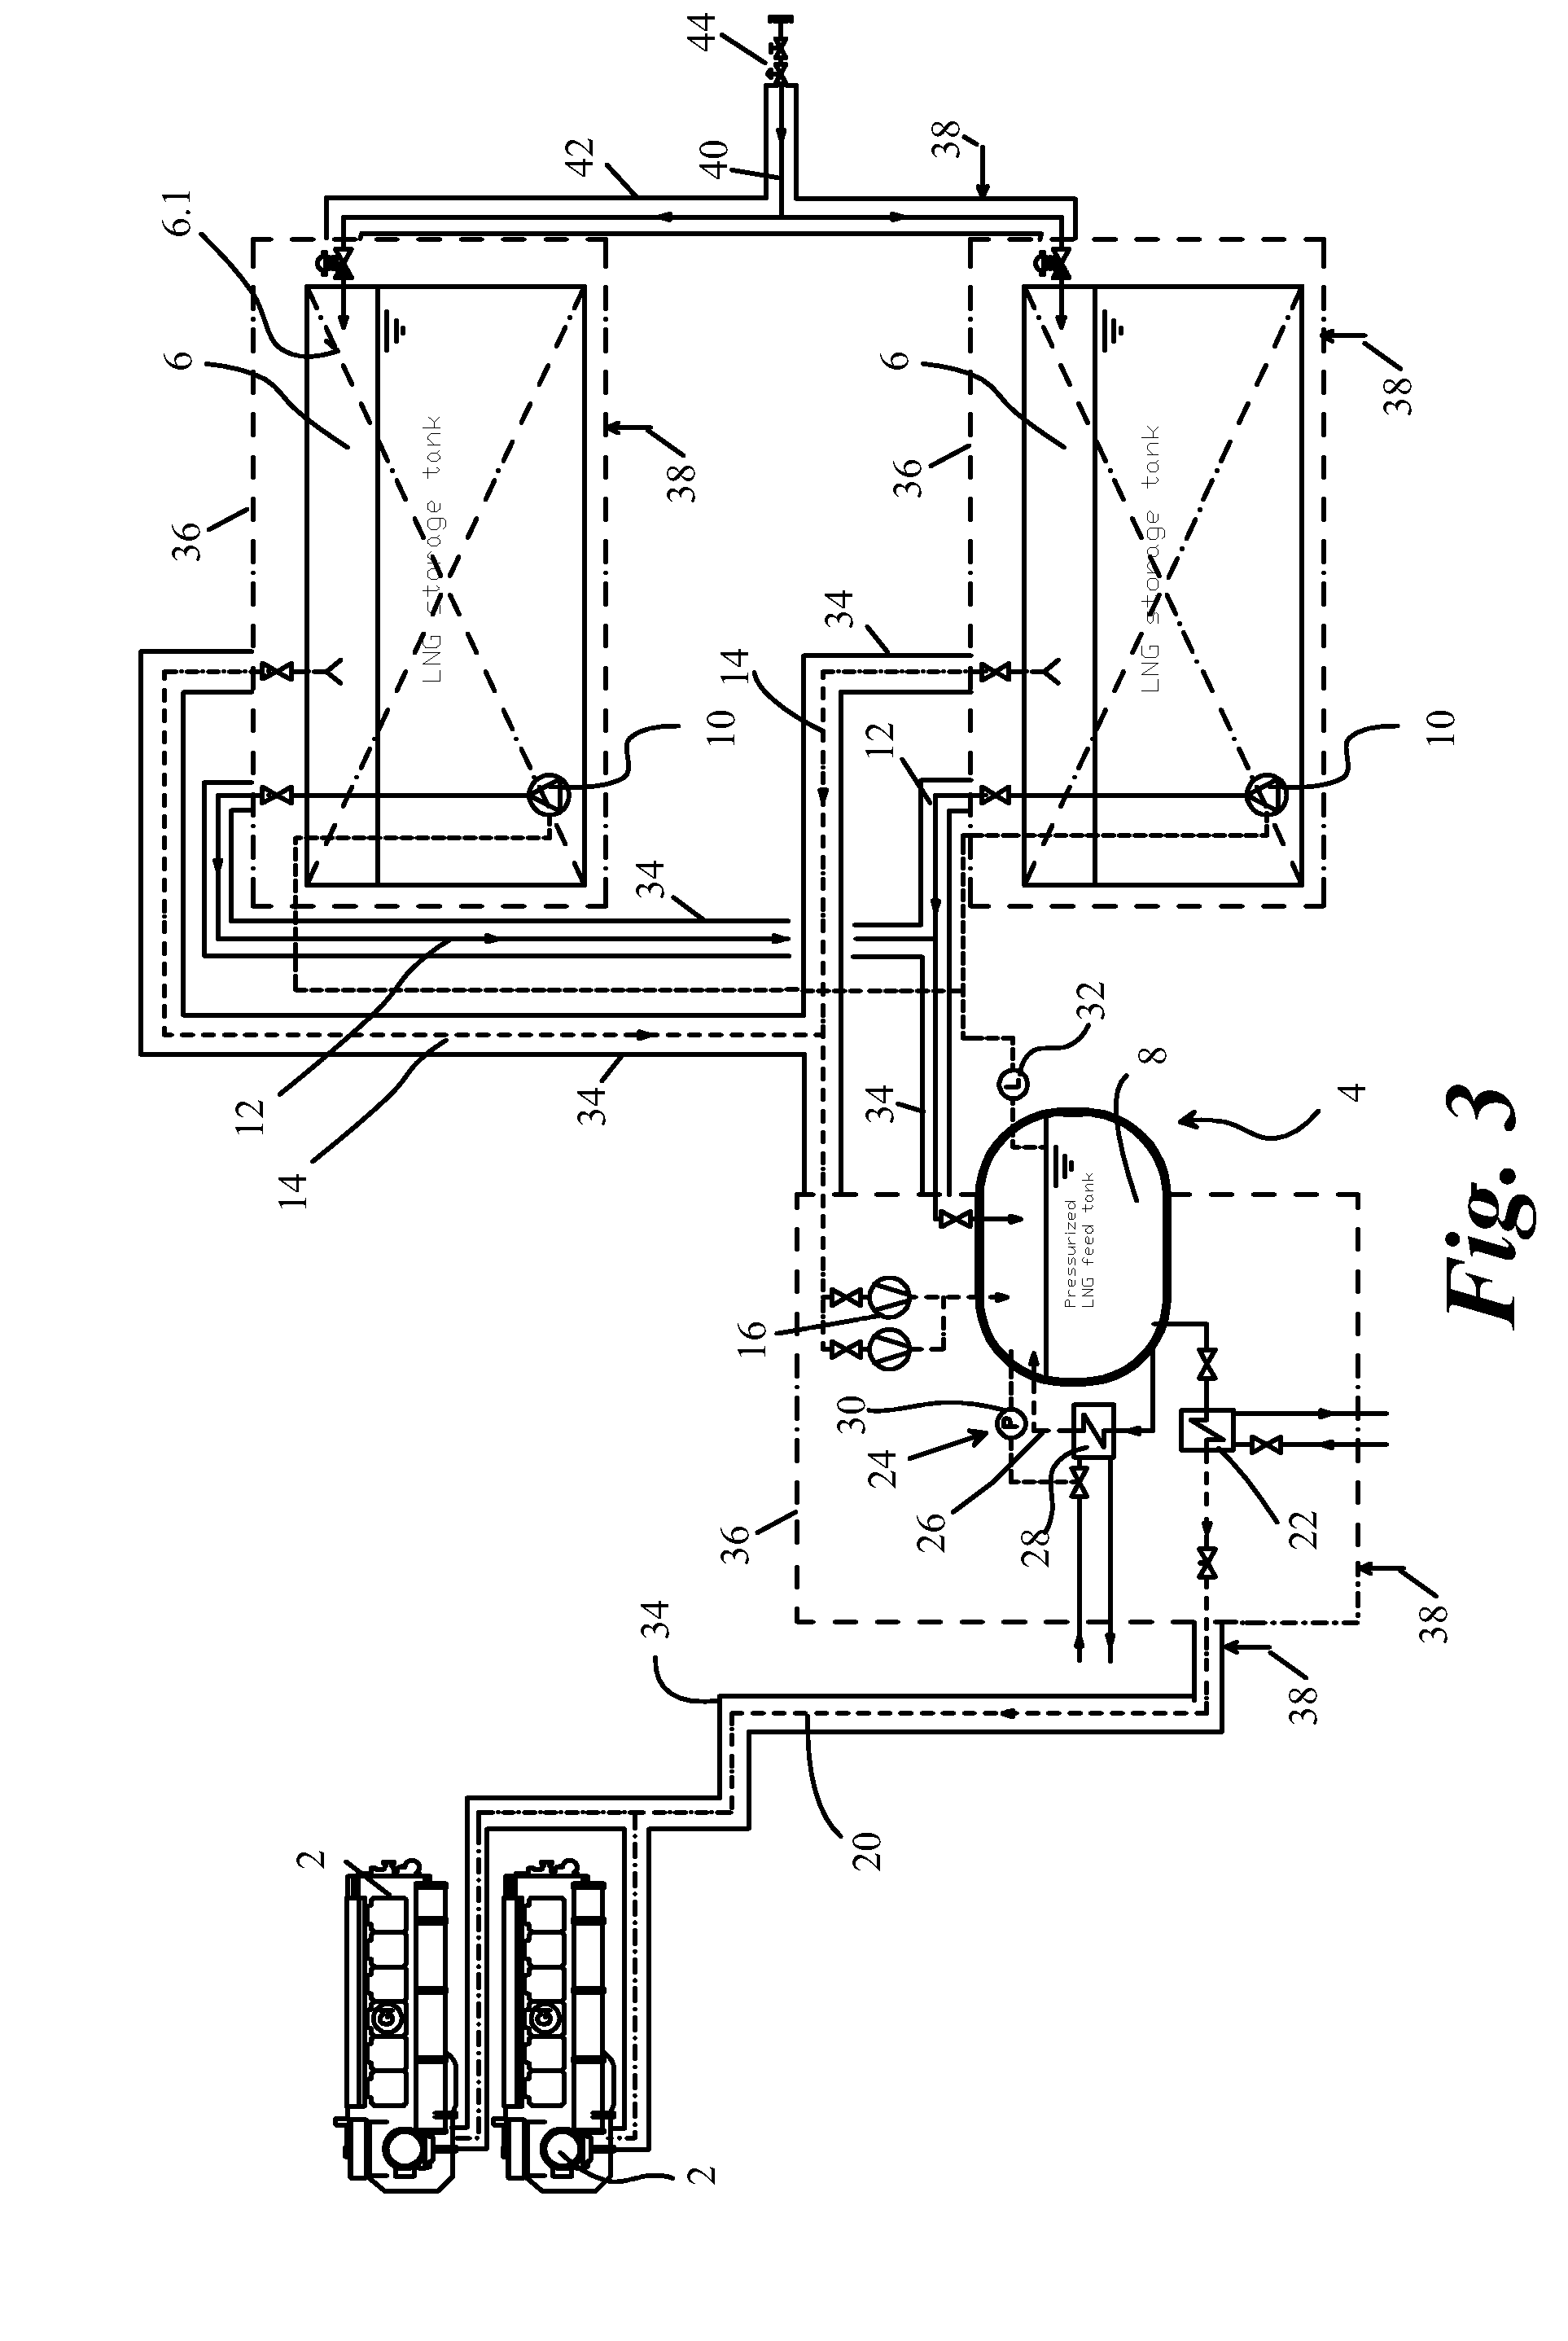 Fuel system for gas driven vessel